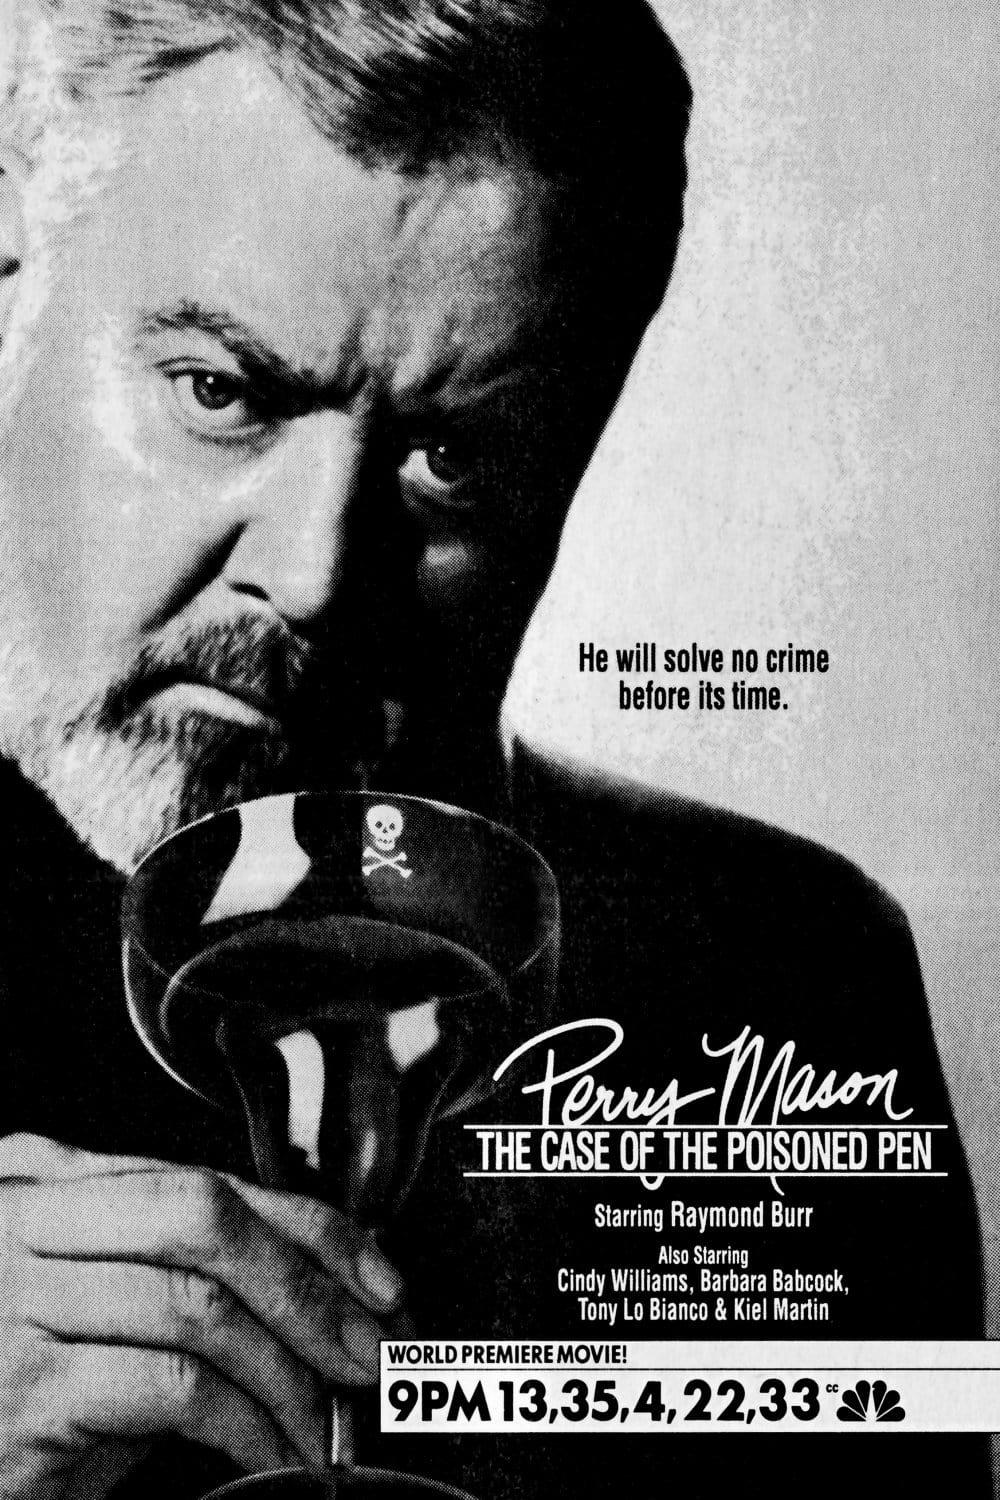 Perry Mason: The Case of the Poisoned Pen poster